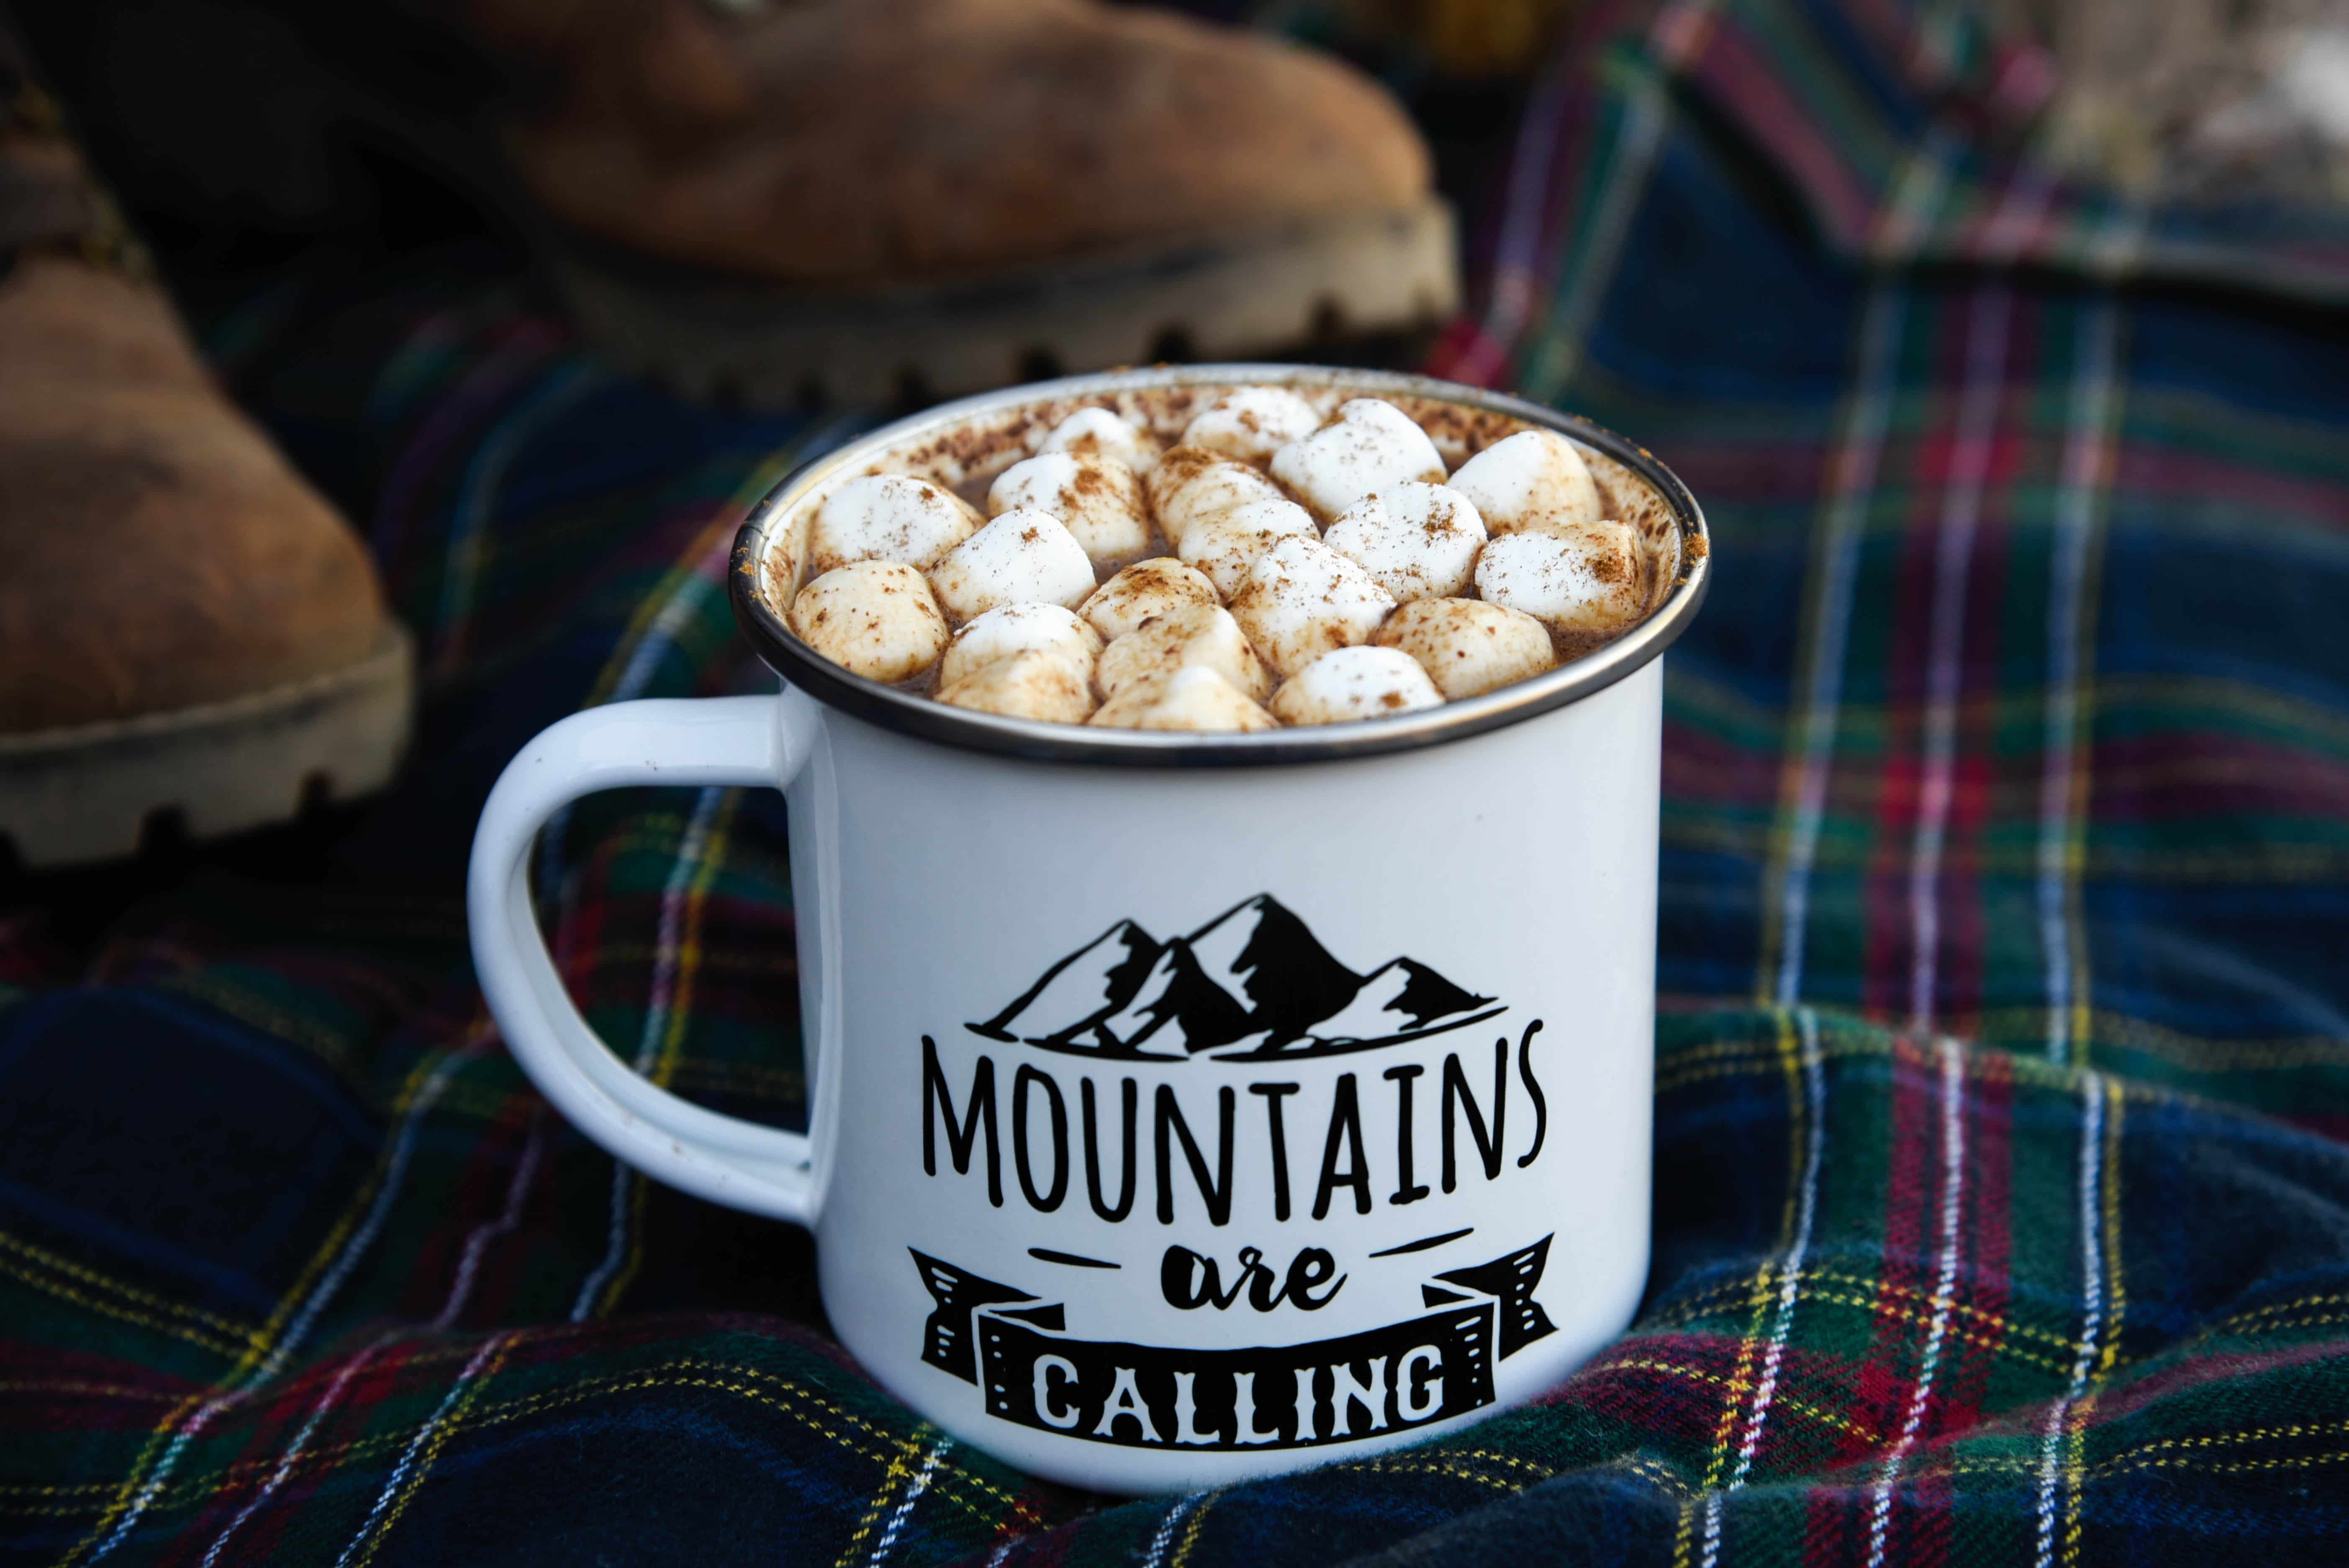 Pumpkin Spice Hot Chocolate with marshmallows